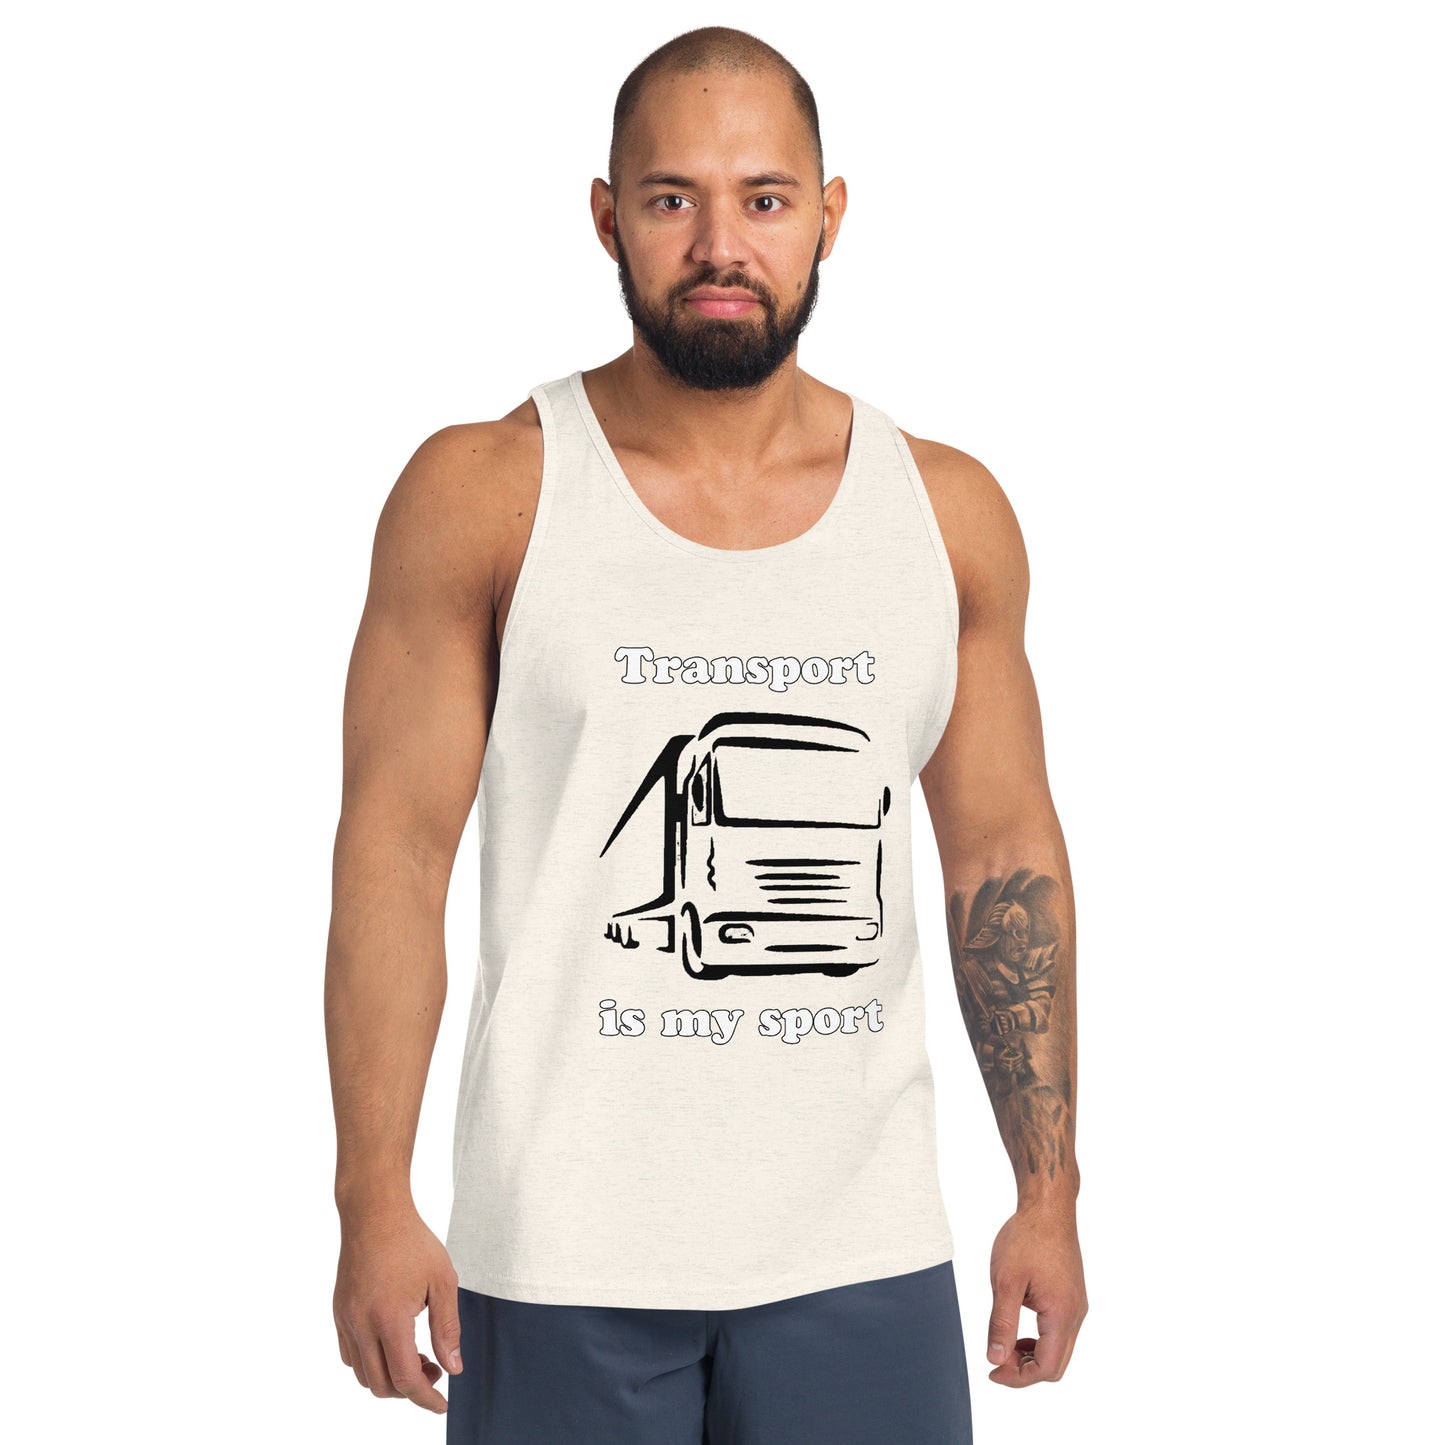 Man with oatmeal tank top with picture of truck and text "Transport is my sport"